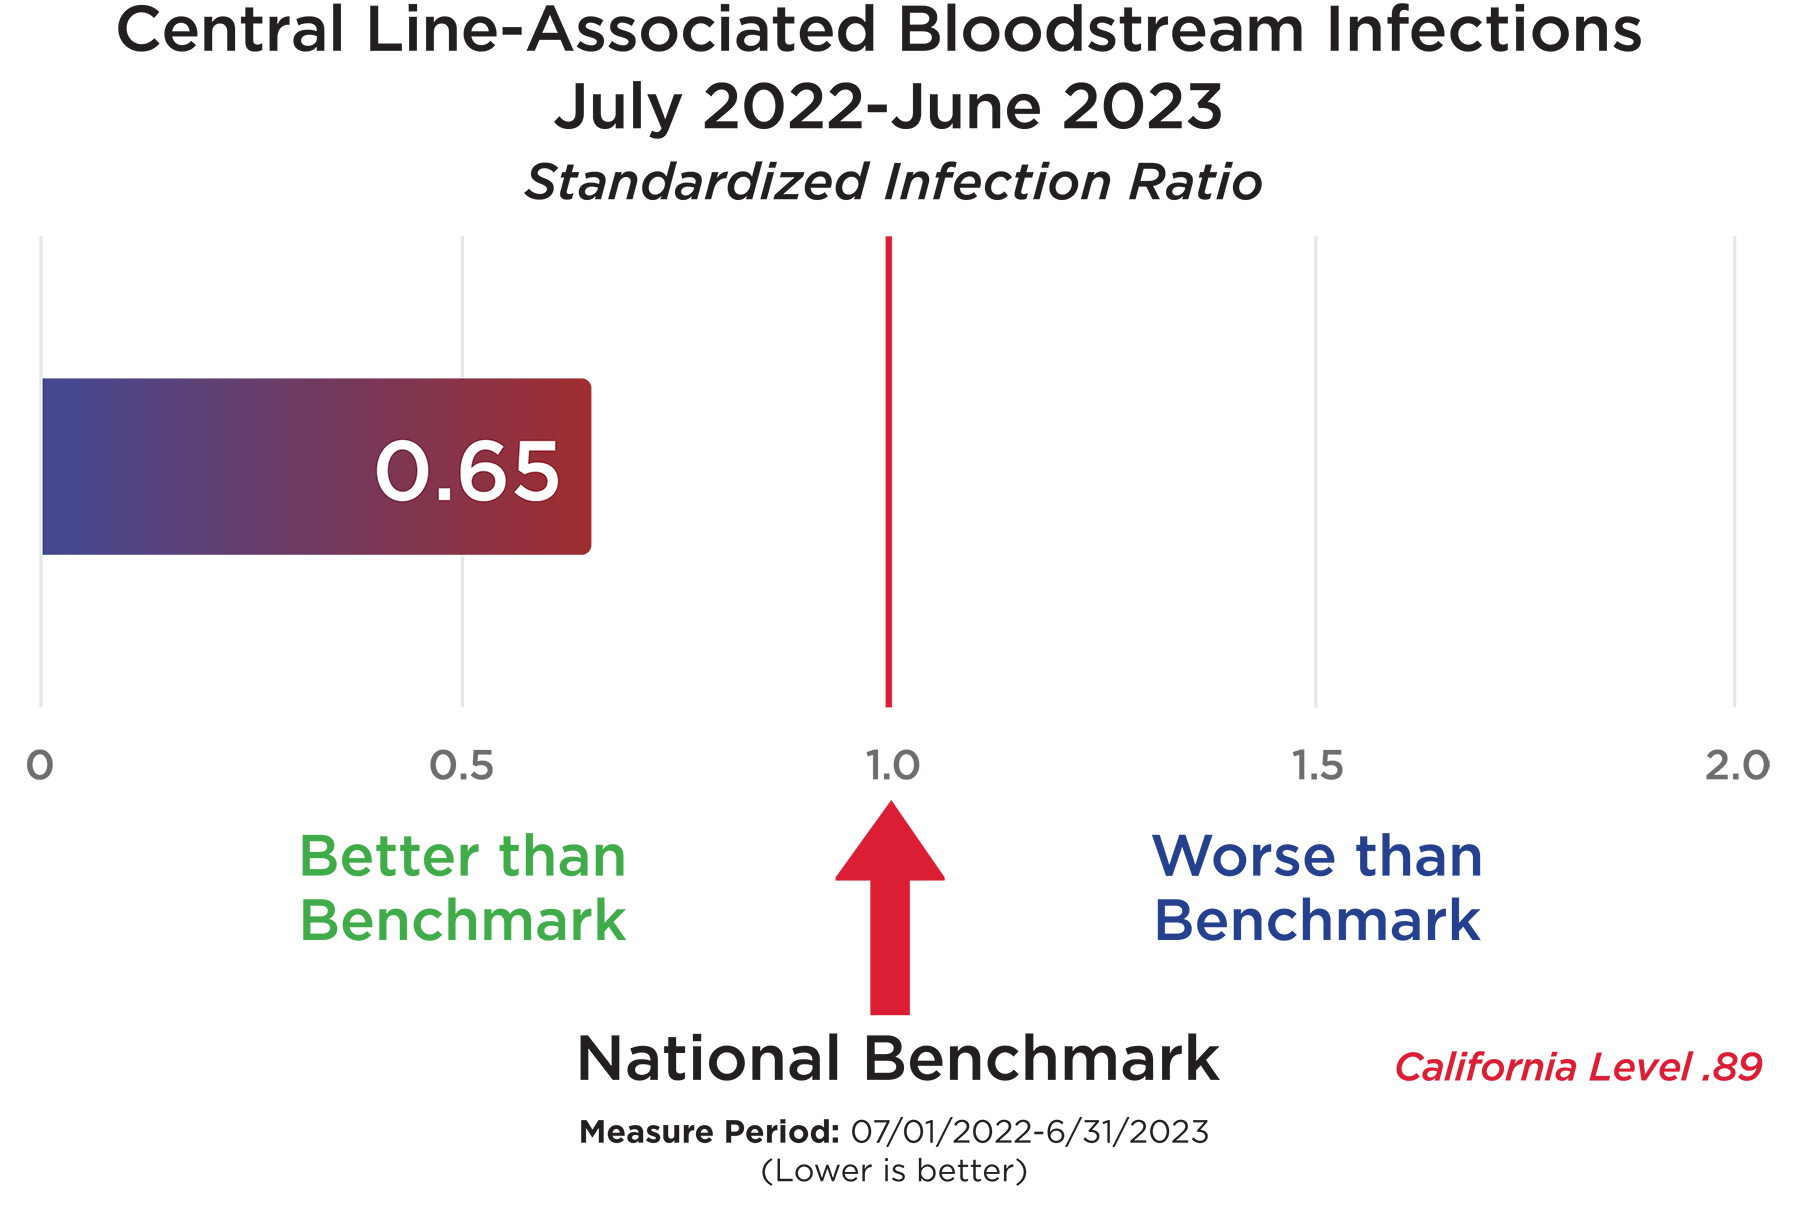 Central Line-Associated Bloodstream Infections, July 2022 - June 2023